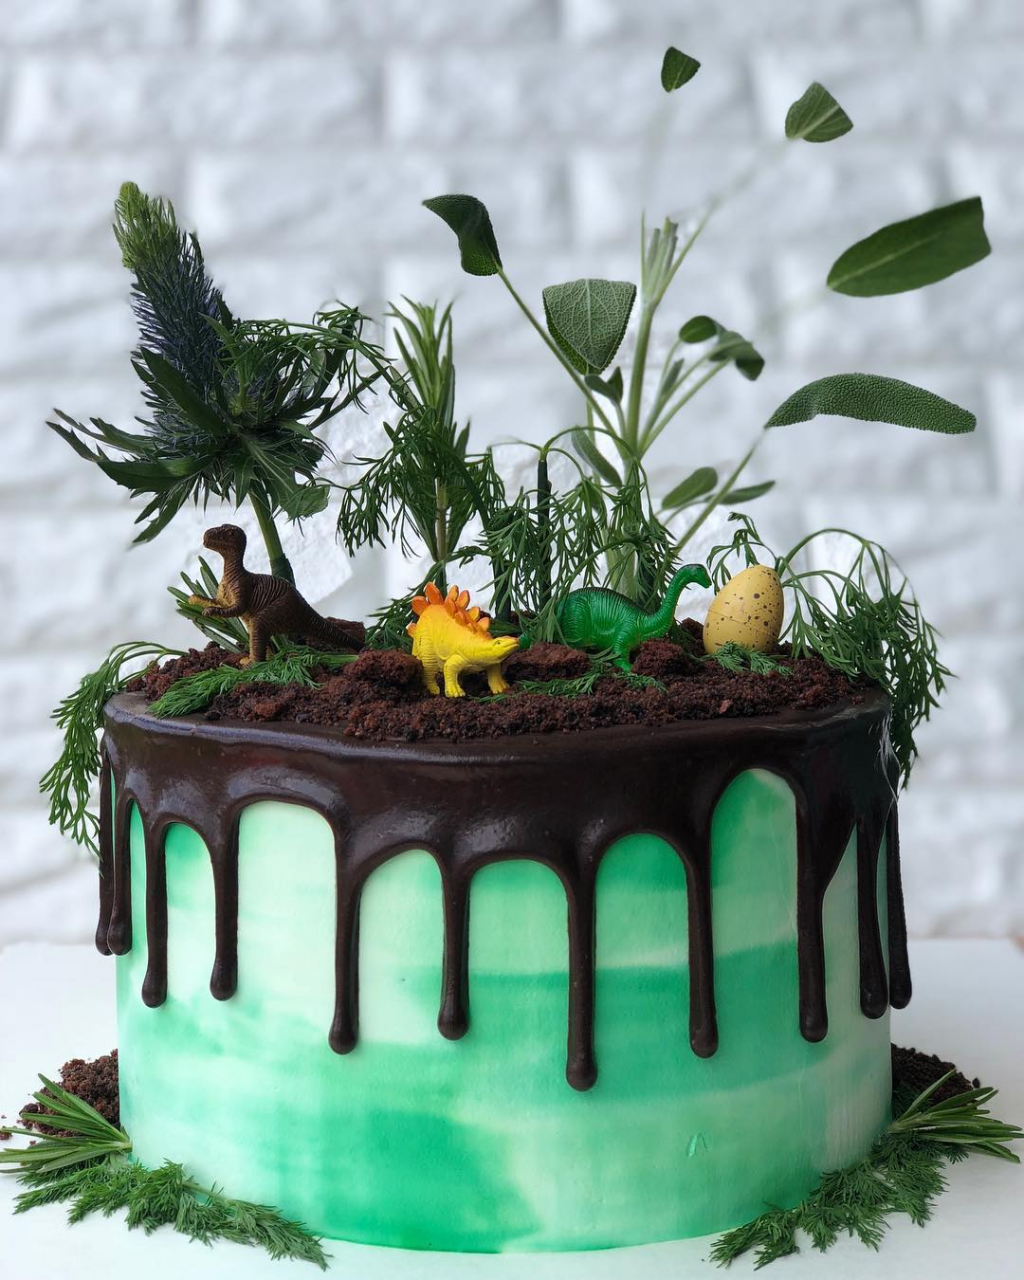 Share more than 129 plant cake design super hot - awesomeenglish.edu.vn